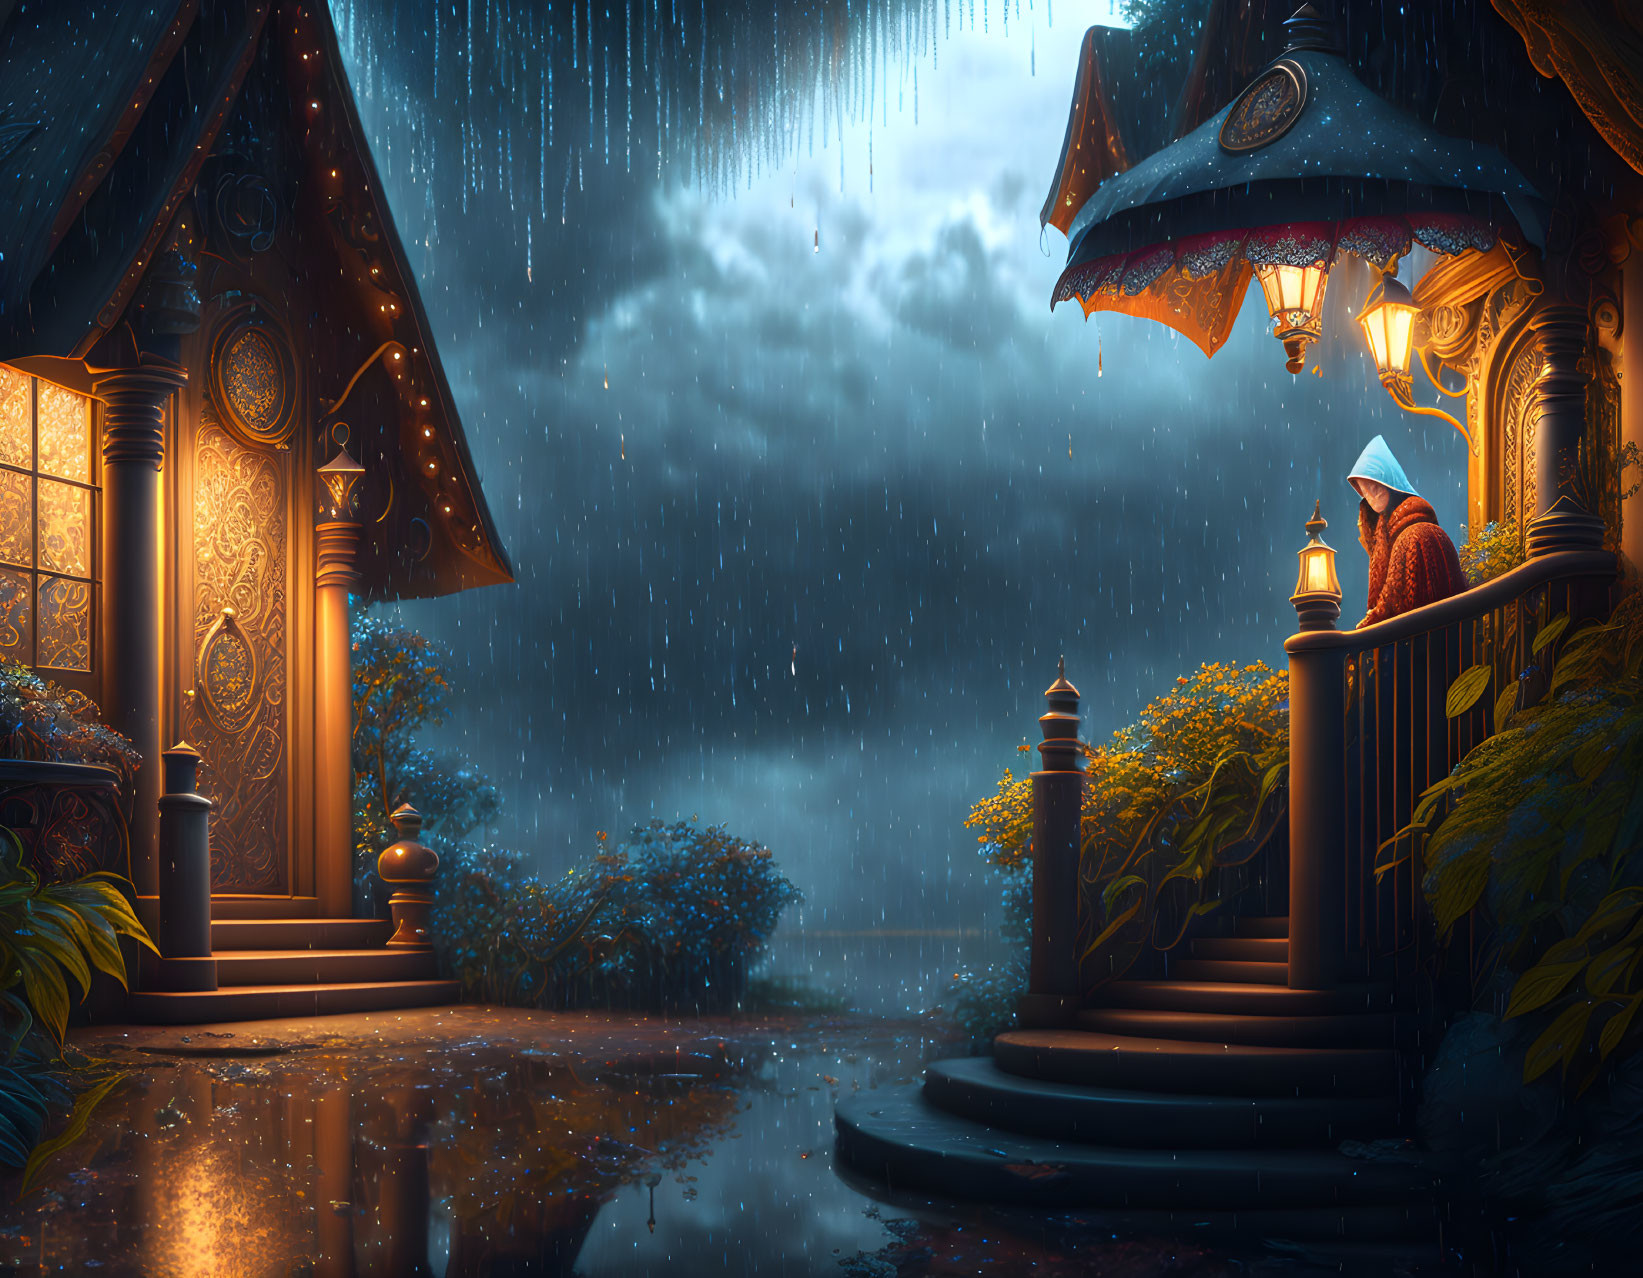 Person under umbrella by traditional house in rainy twilight with glowing lamps.